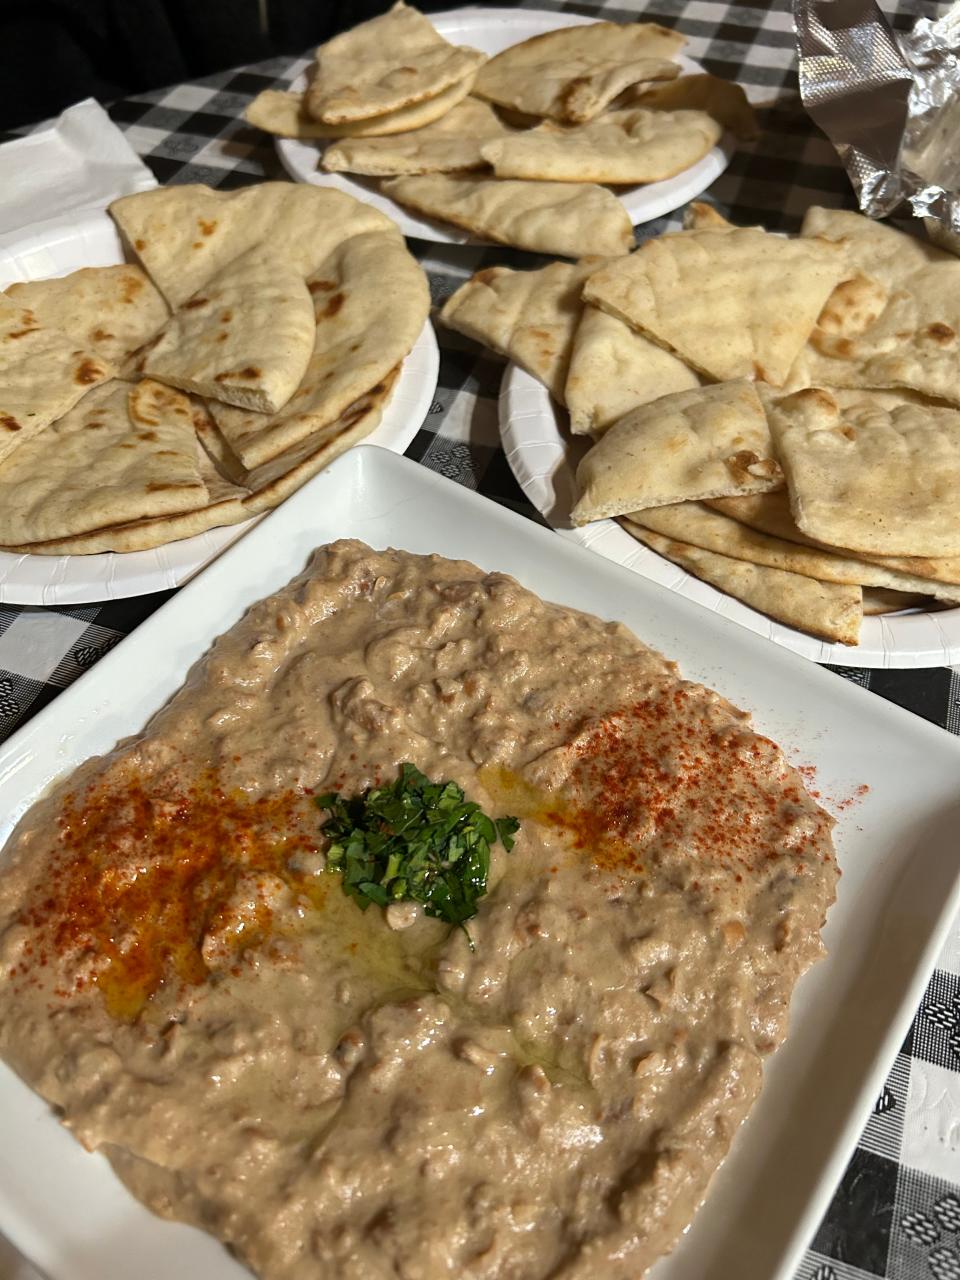 Ful mudammas (Egyptian fava beans) and pita at Mid-East Cafe and Restaurant in Akron.